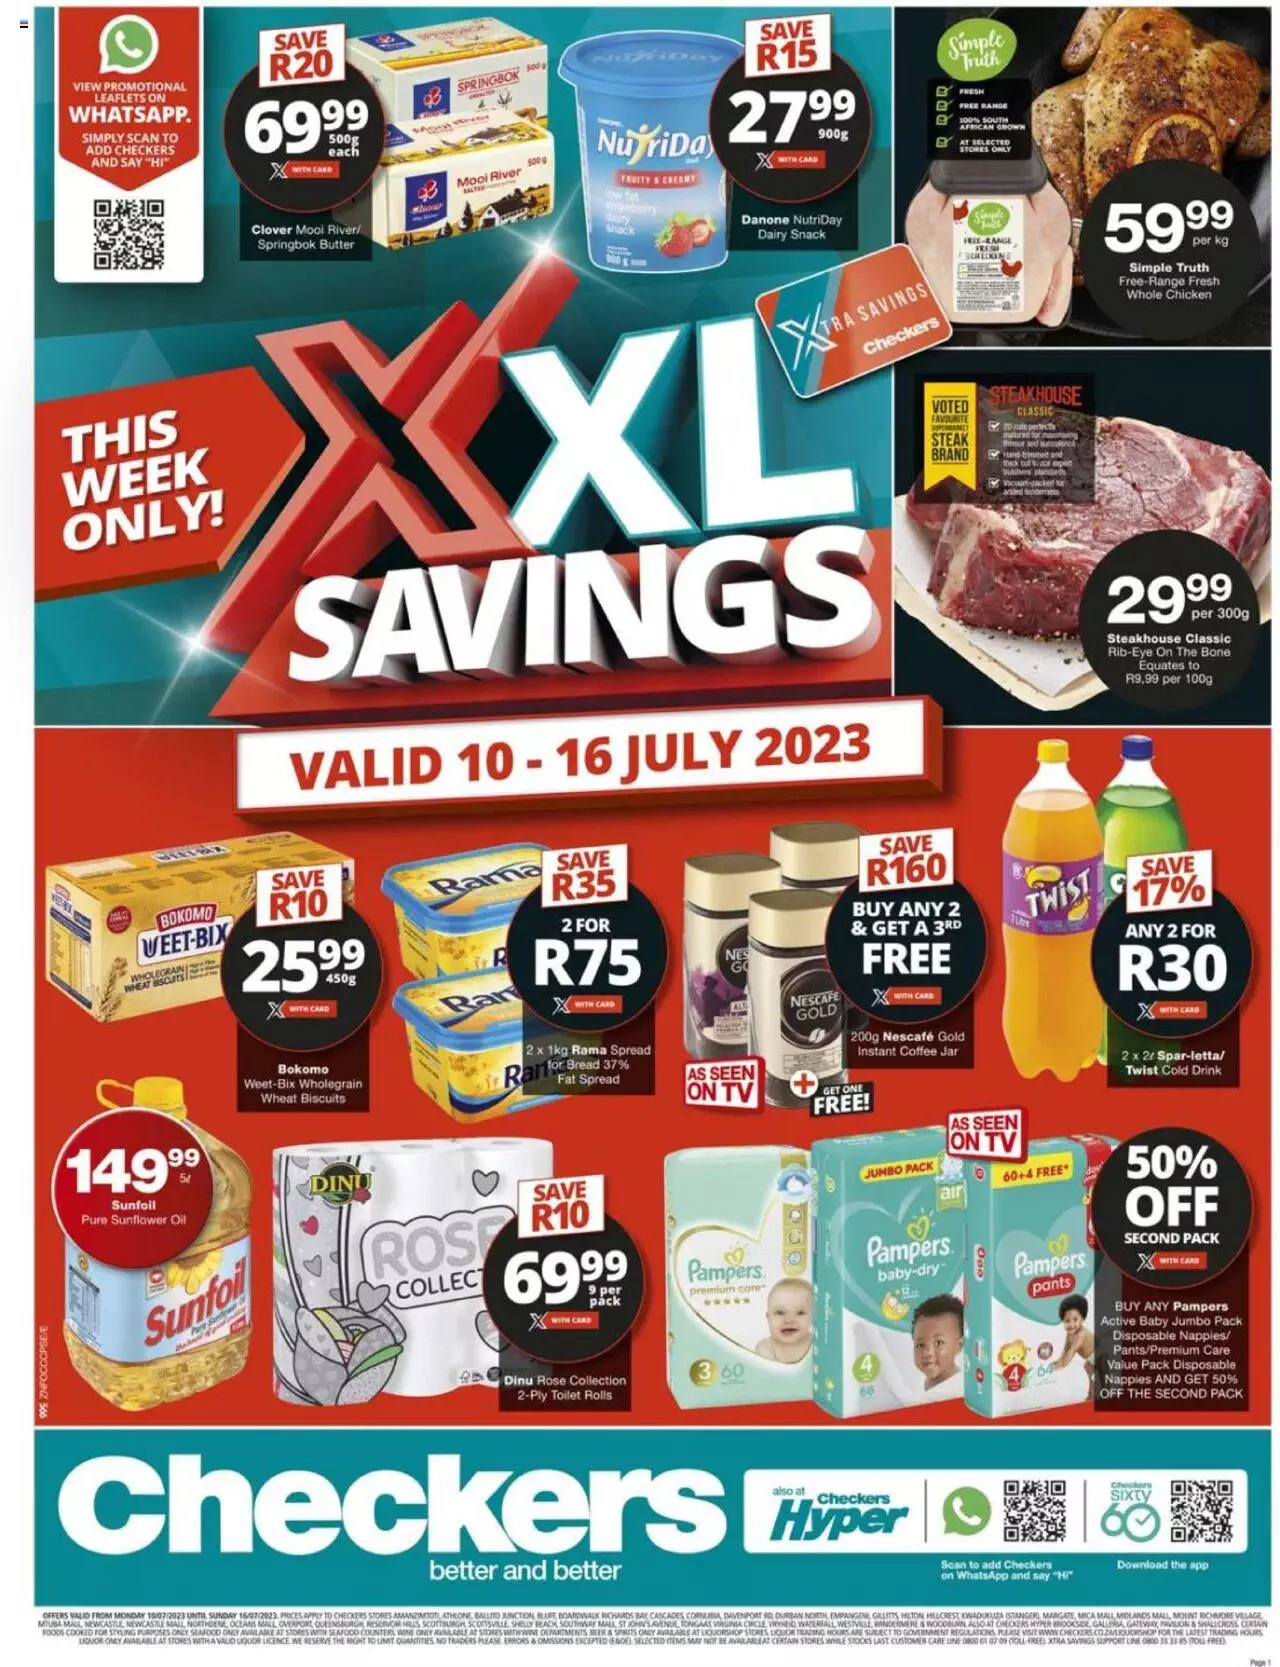 Checkers Specials XXL Savings 10 – 16 July 2023